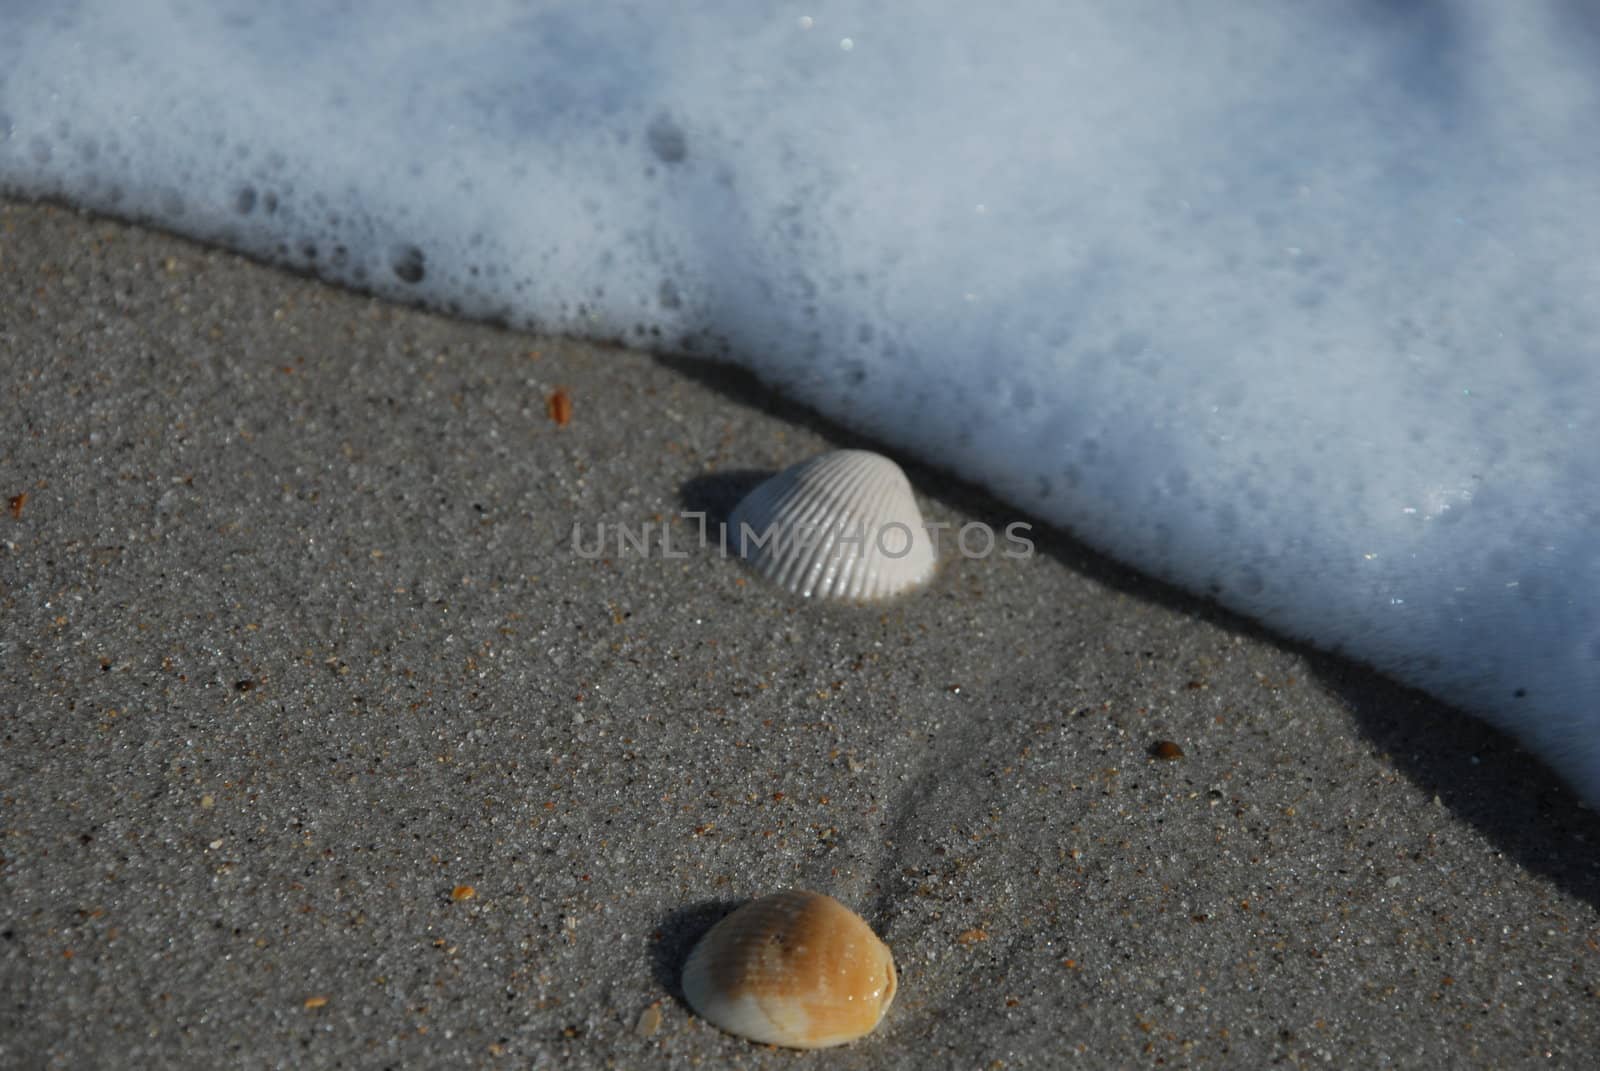 Two shells by northwoodsphoto